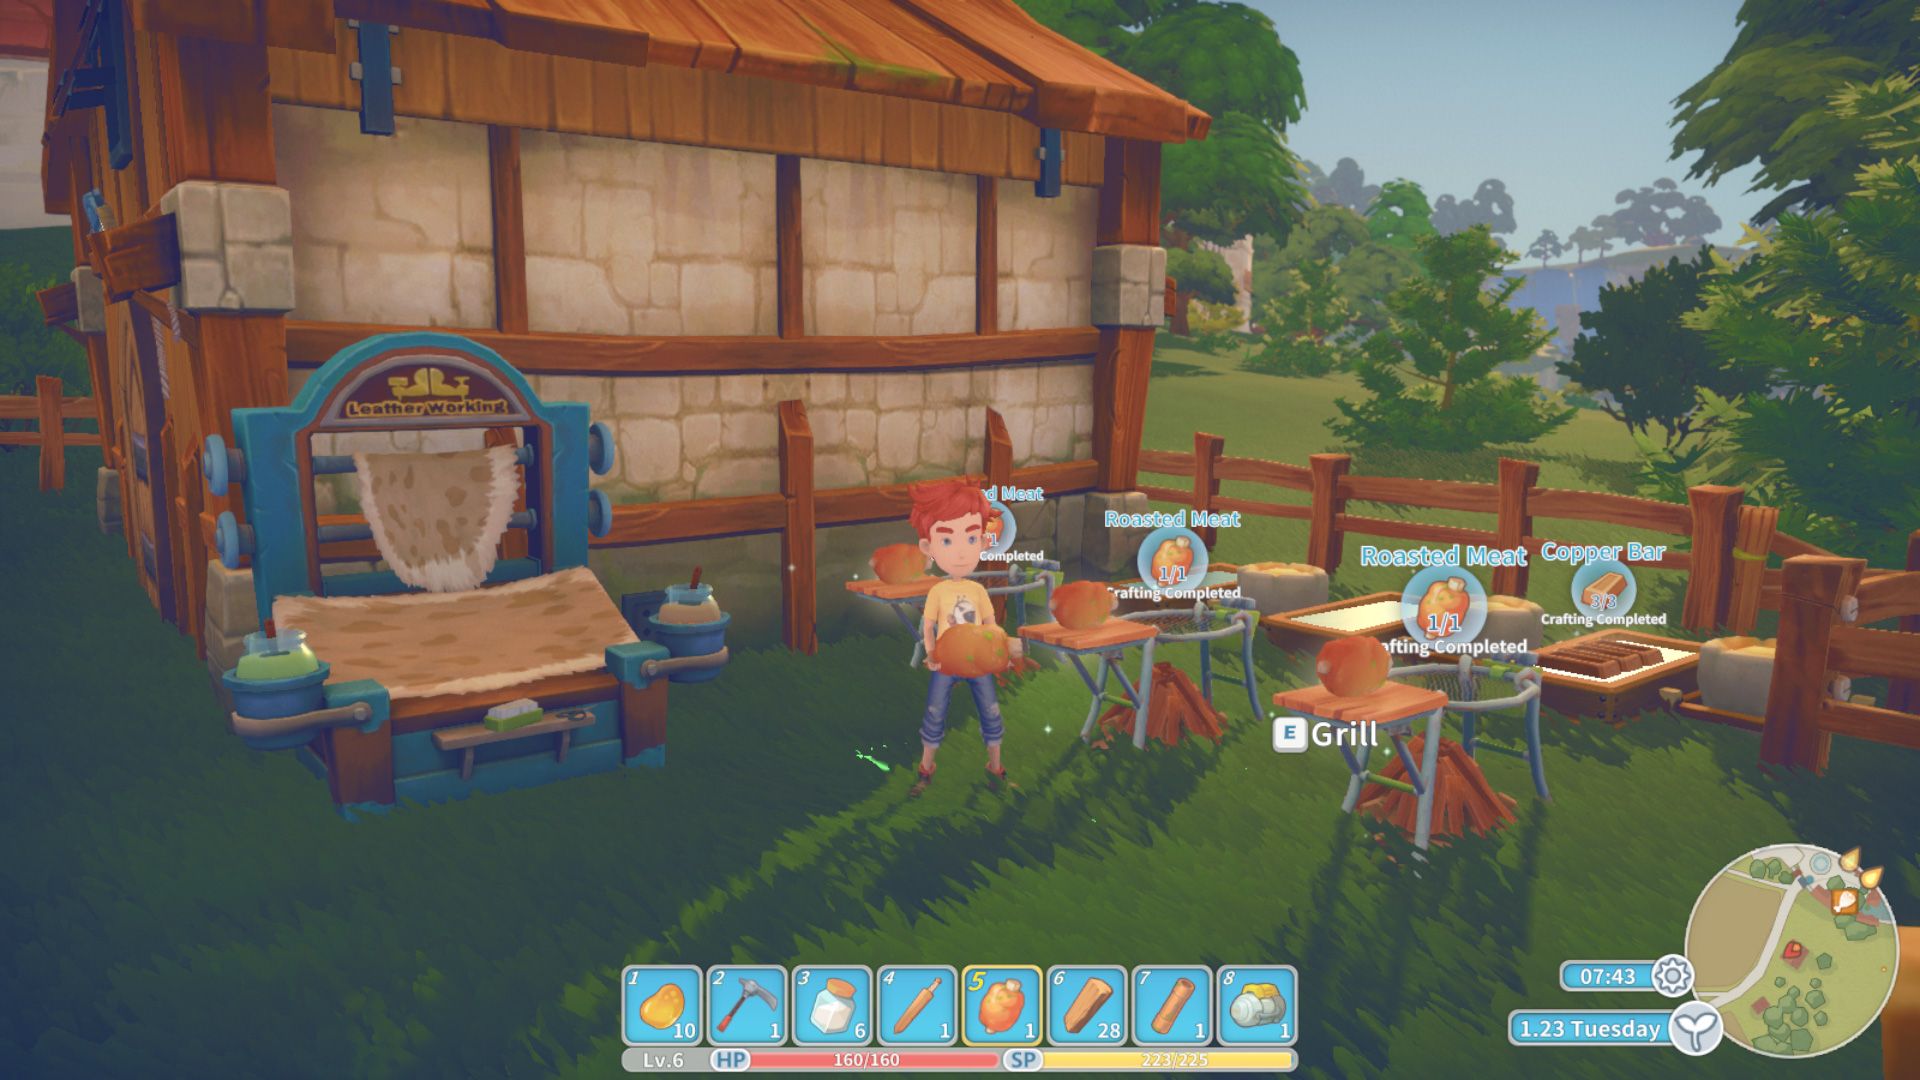 Mine time. My time at Portia мультиплеер. My time at Portia early access. My time at Portia опасные руины. My time at Portia мастерская.